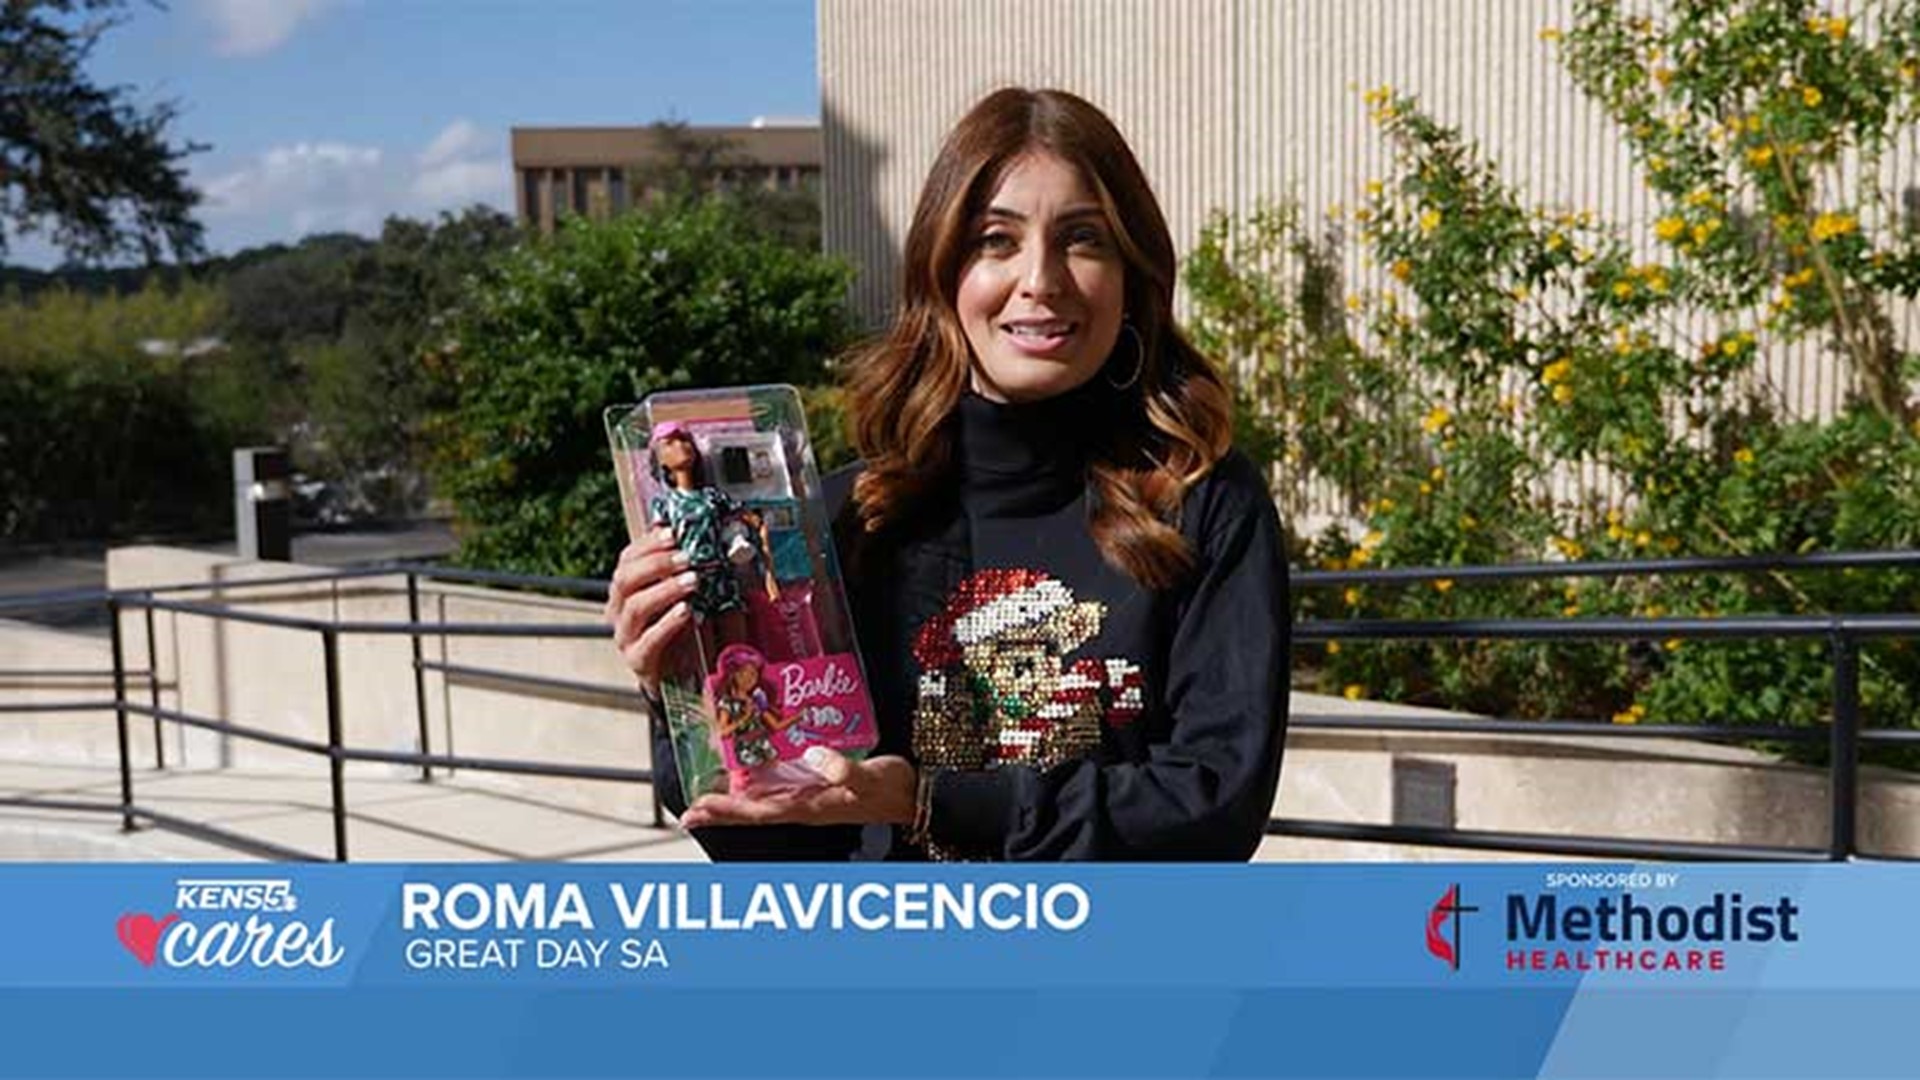 KENS 5's Roma Villavicencio says one of her favorite toys growing up was Barbie! You can help create lasting memories for children in need this holiday season.